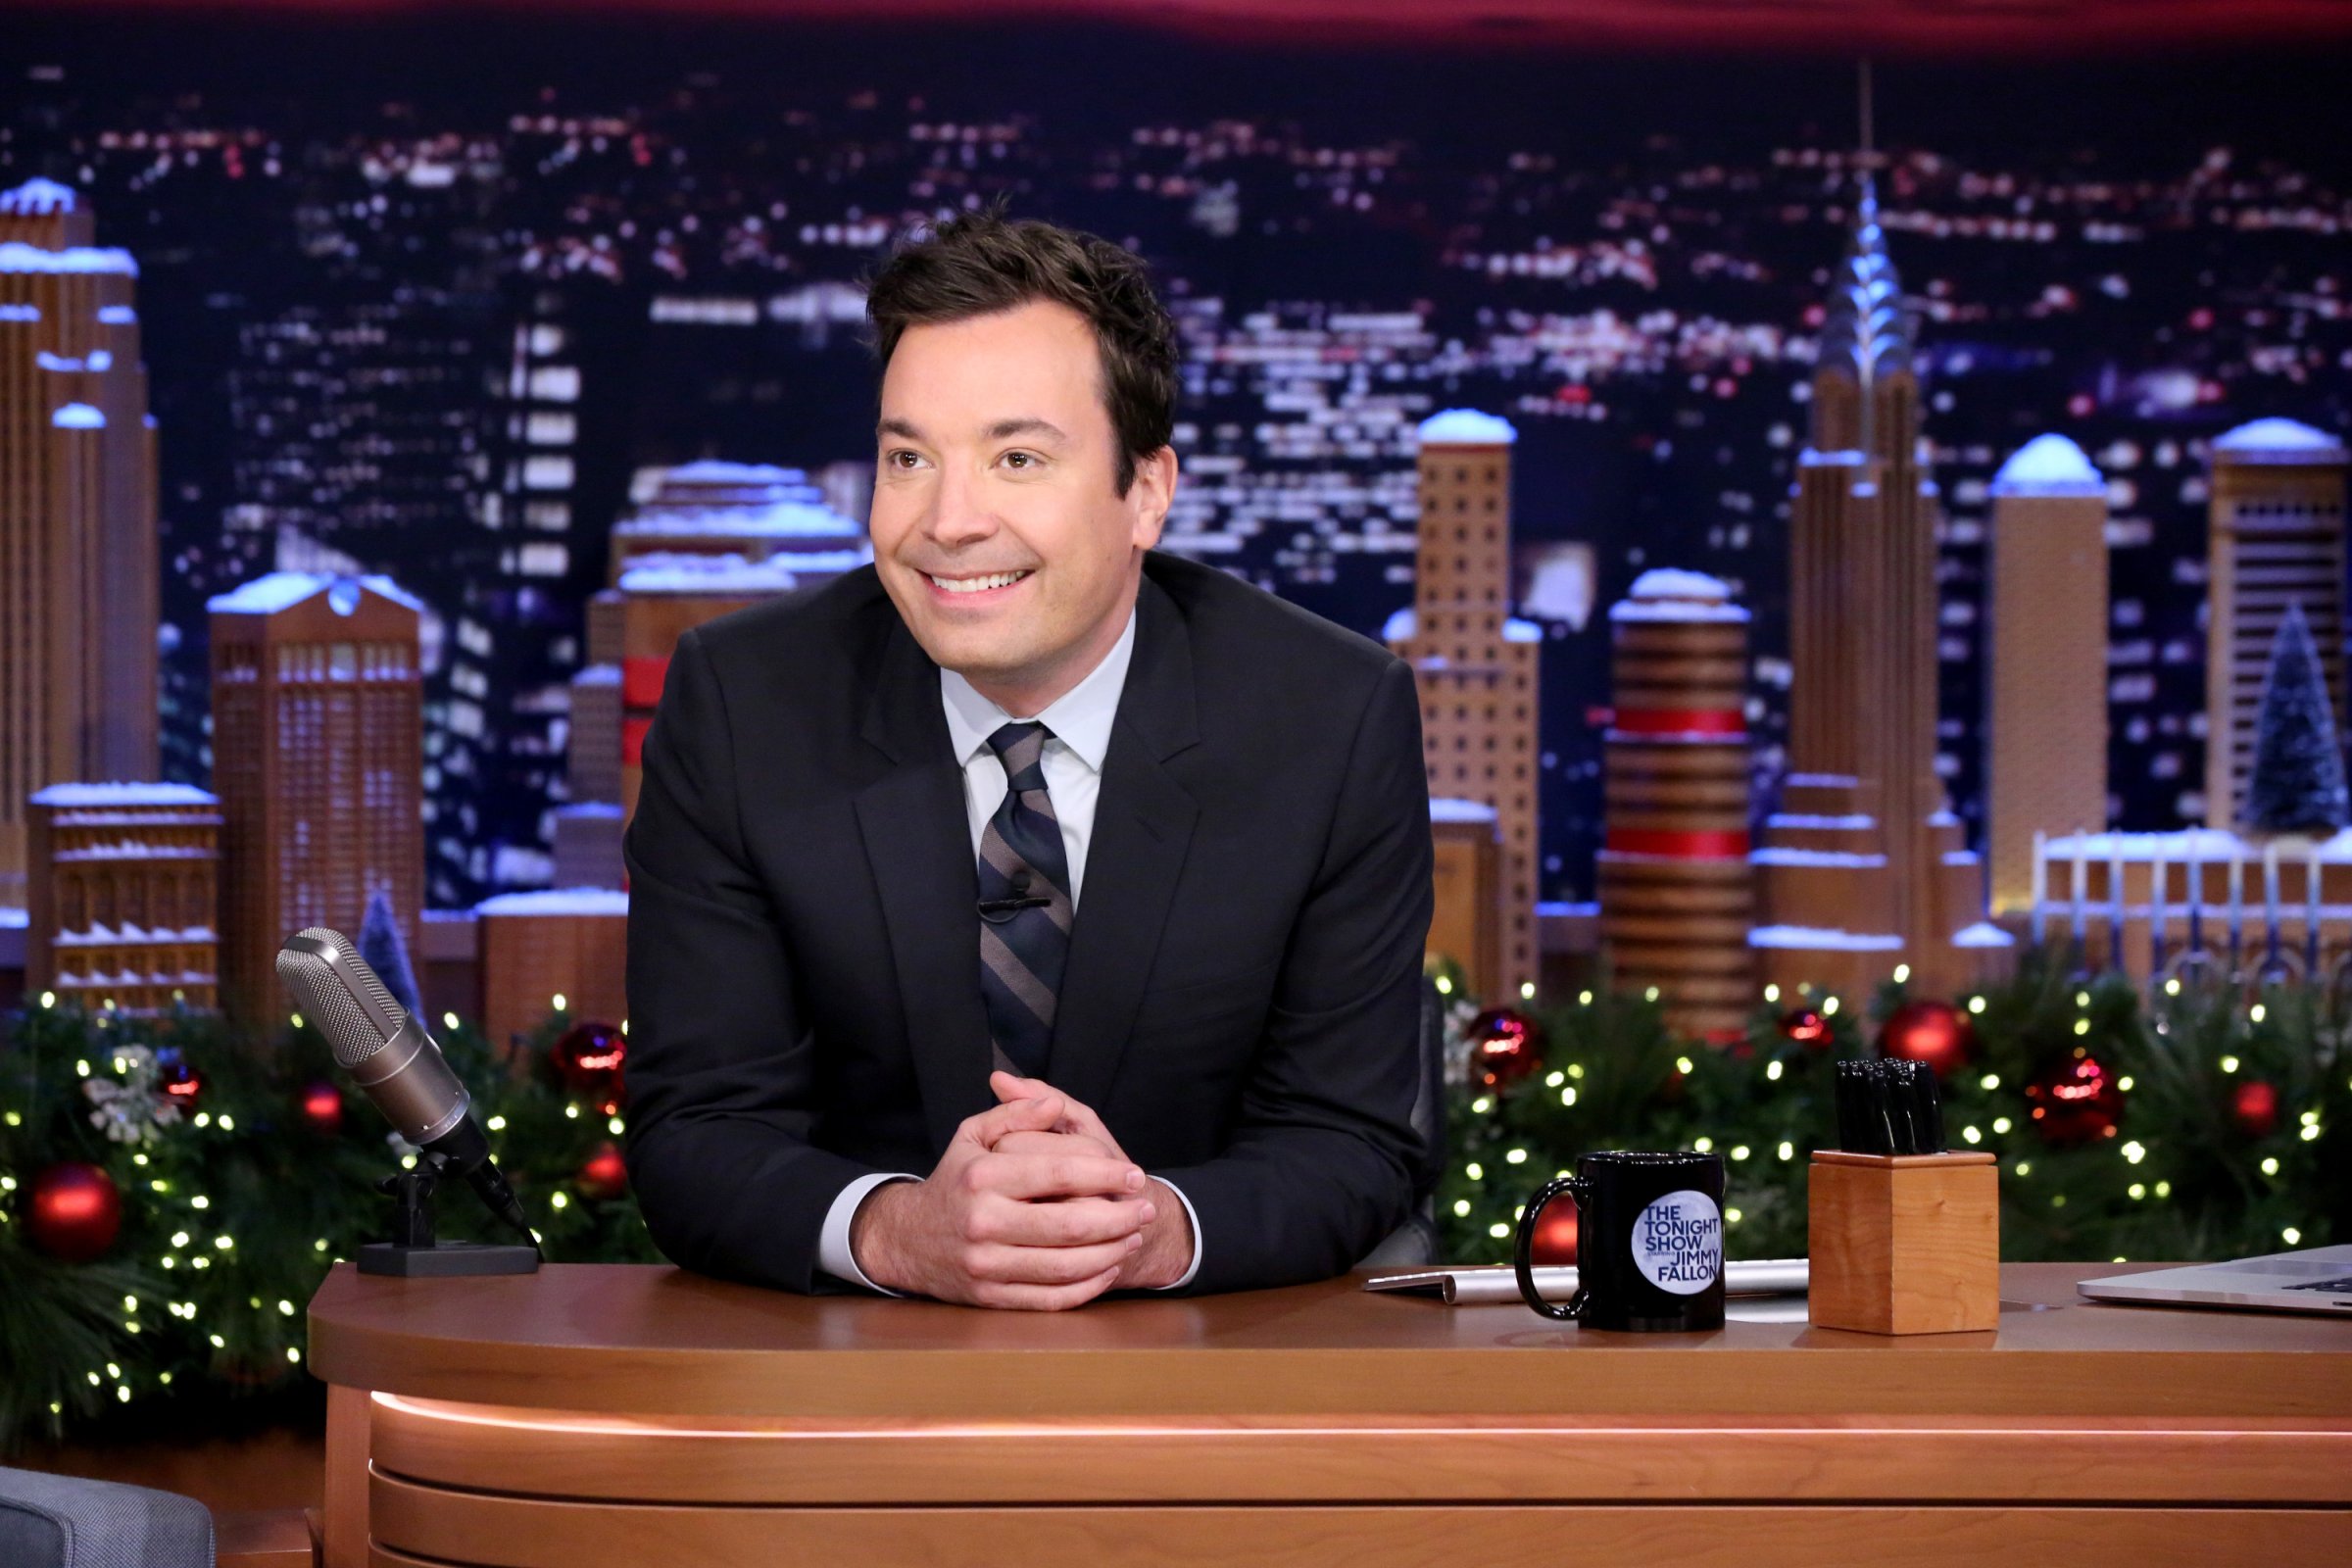 THE TONIGHT SHOW STARRING JIMMY FALLON -- Episode 0388 -- Pictured: Host Jimmy Fallon on December 15, 2015 -- (Photo by: Douglas Gorenstein/NBC/NBCU Photo Bank)